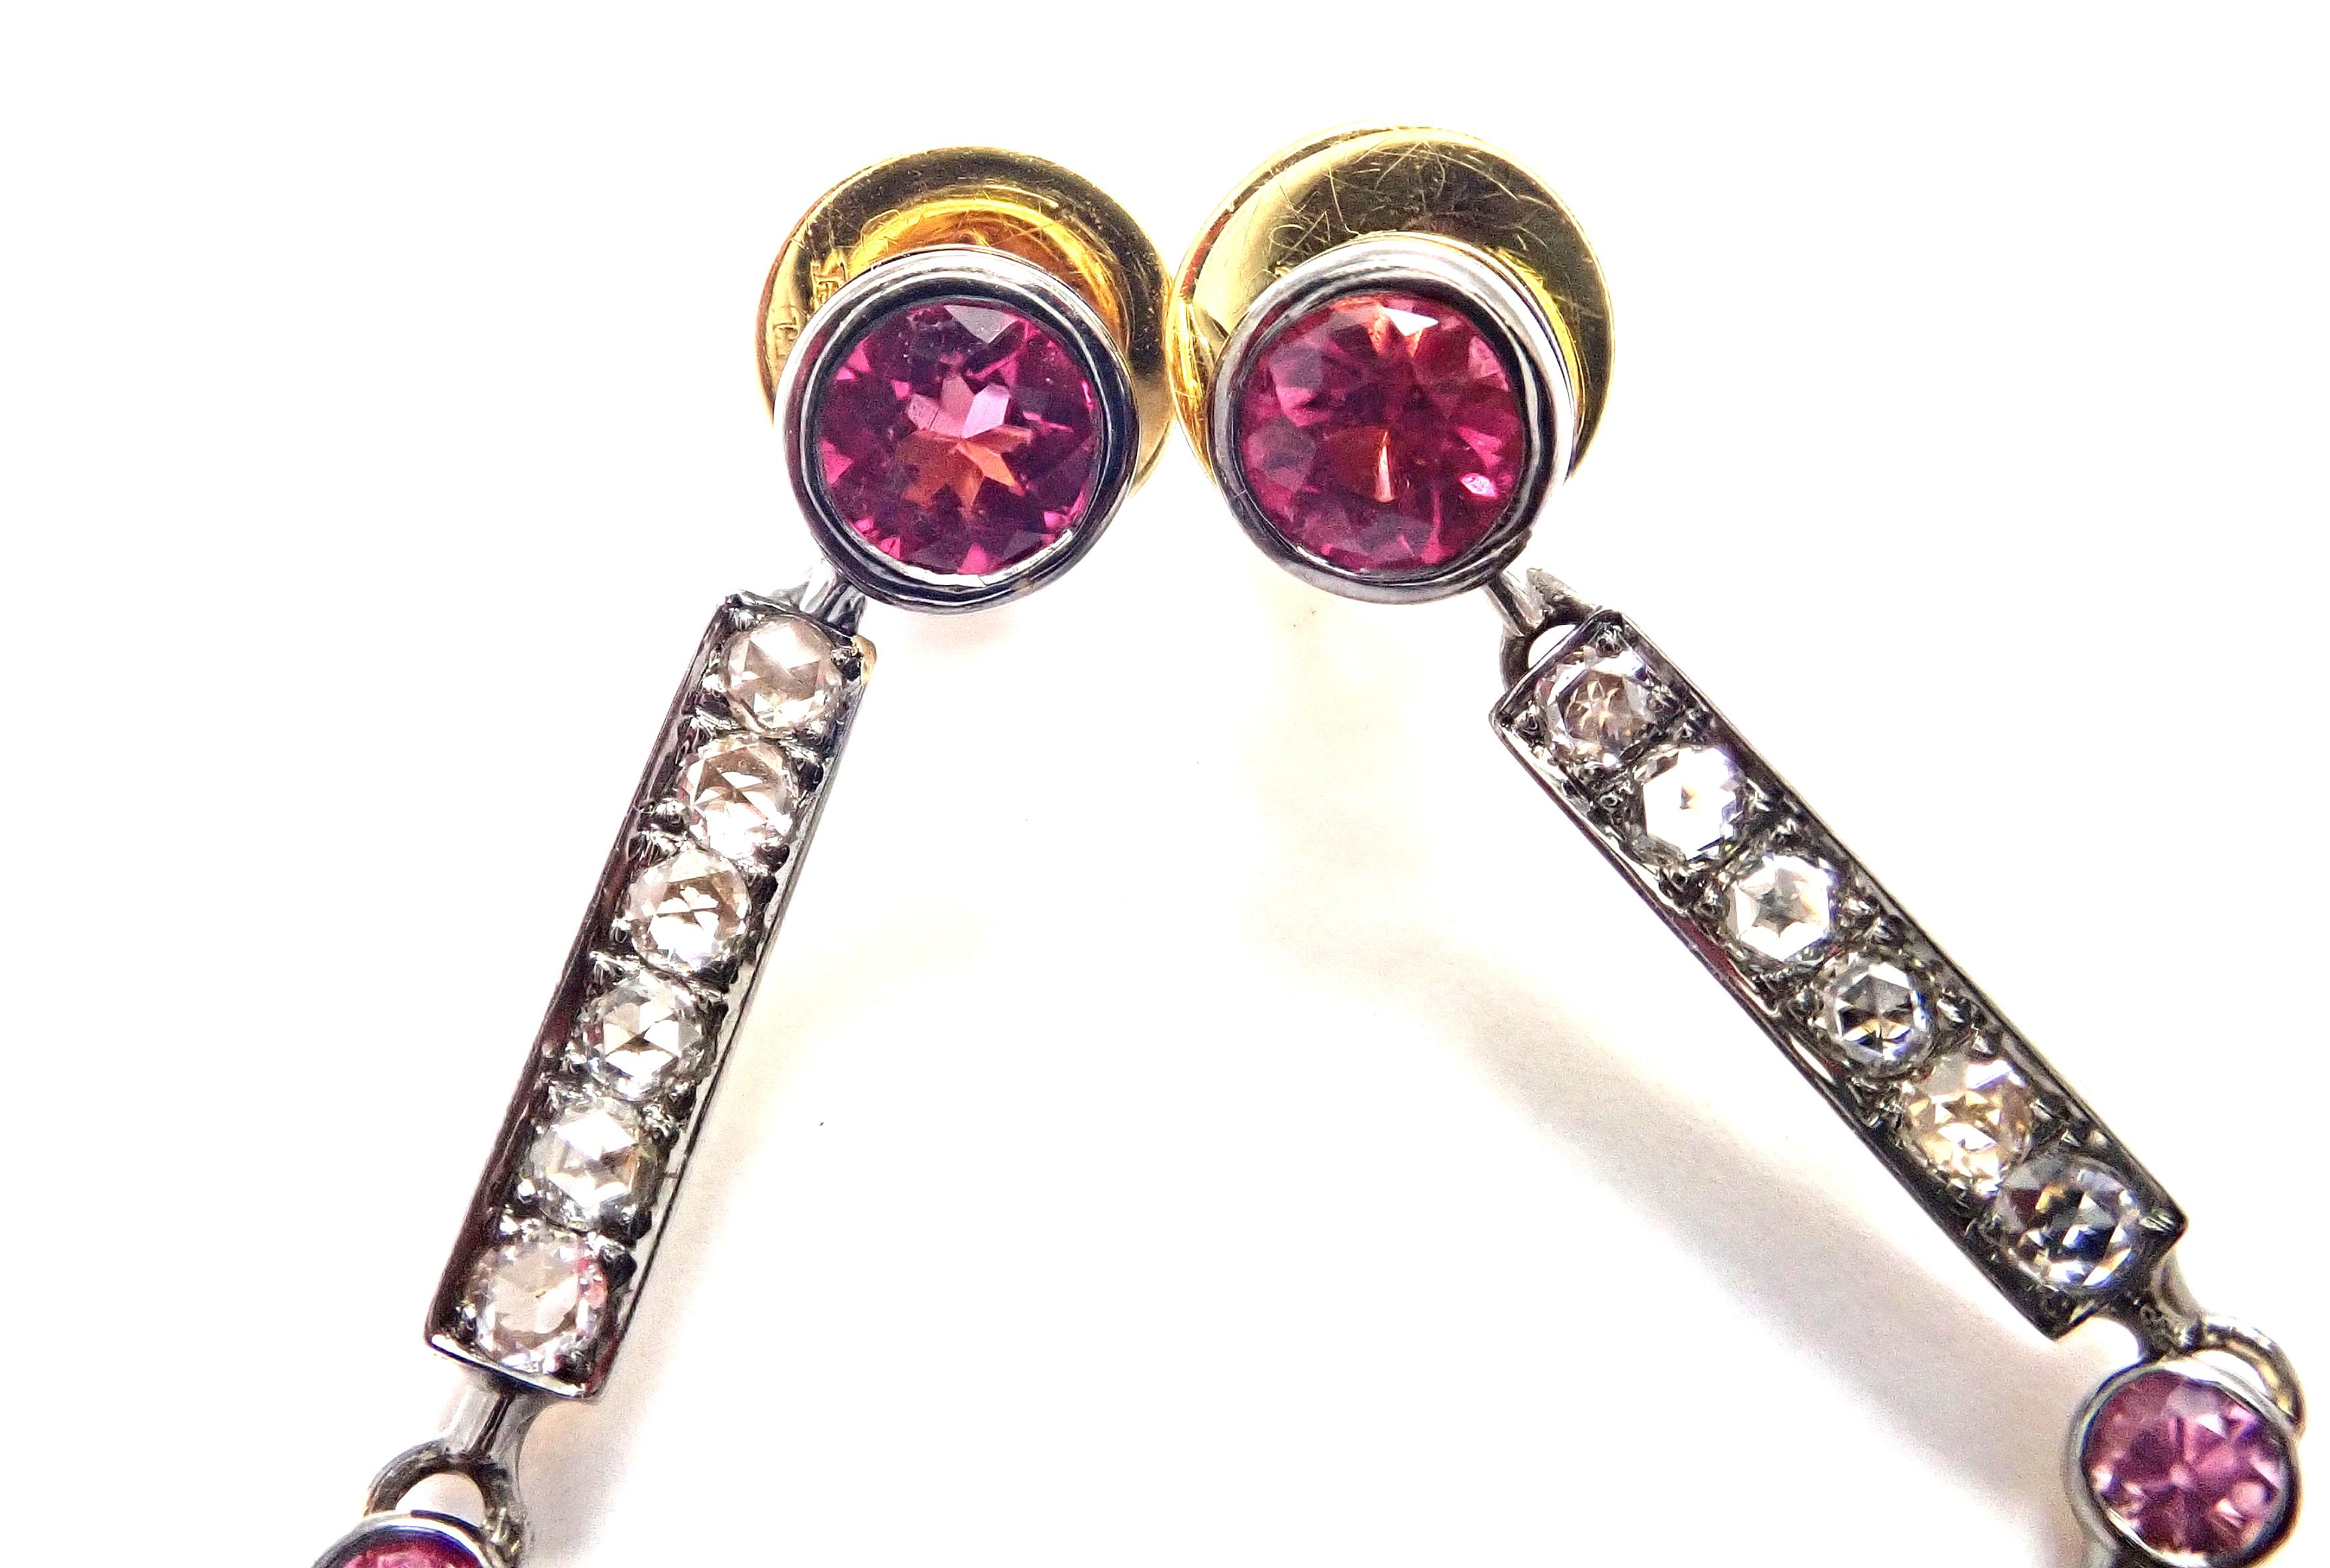 18k Yellow Gold Diamond Pink Sapphire Dangle Earrings by Laura Munder. 
With 42 rose cut diamonds SI1 clarity, H color total weight approximately 1ct 
42 pink sapphires total weight approximately 7ct
These earrings are for pierced ears.
Details: